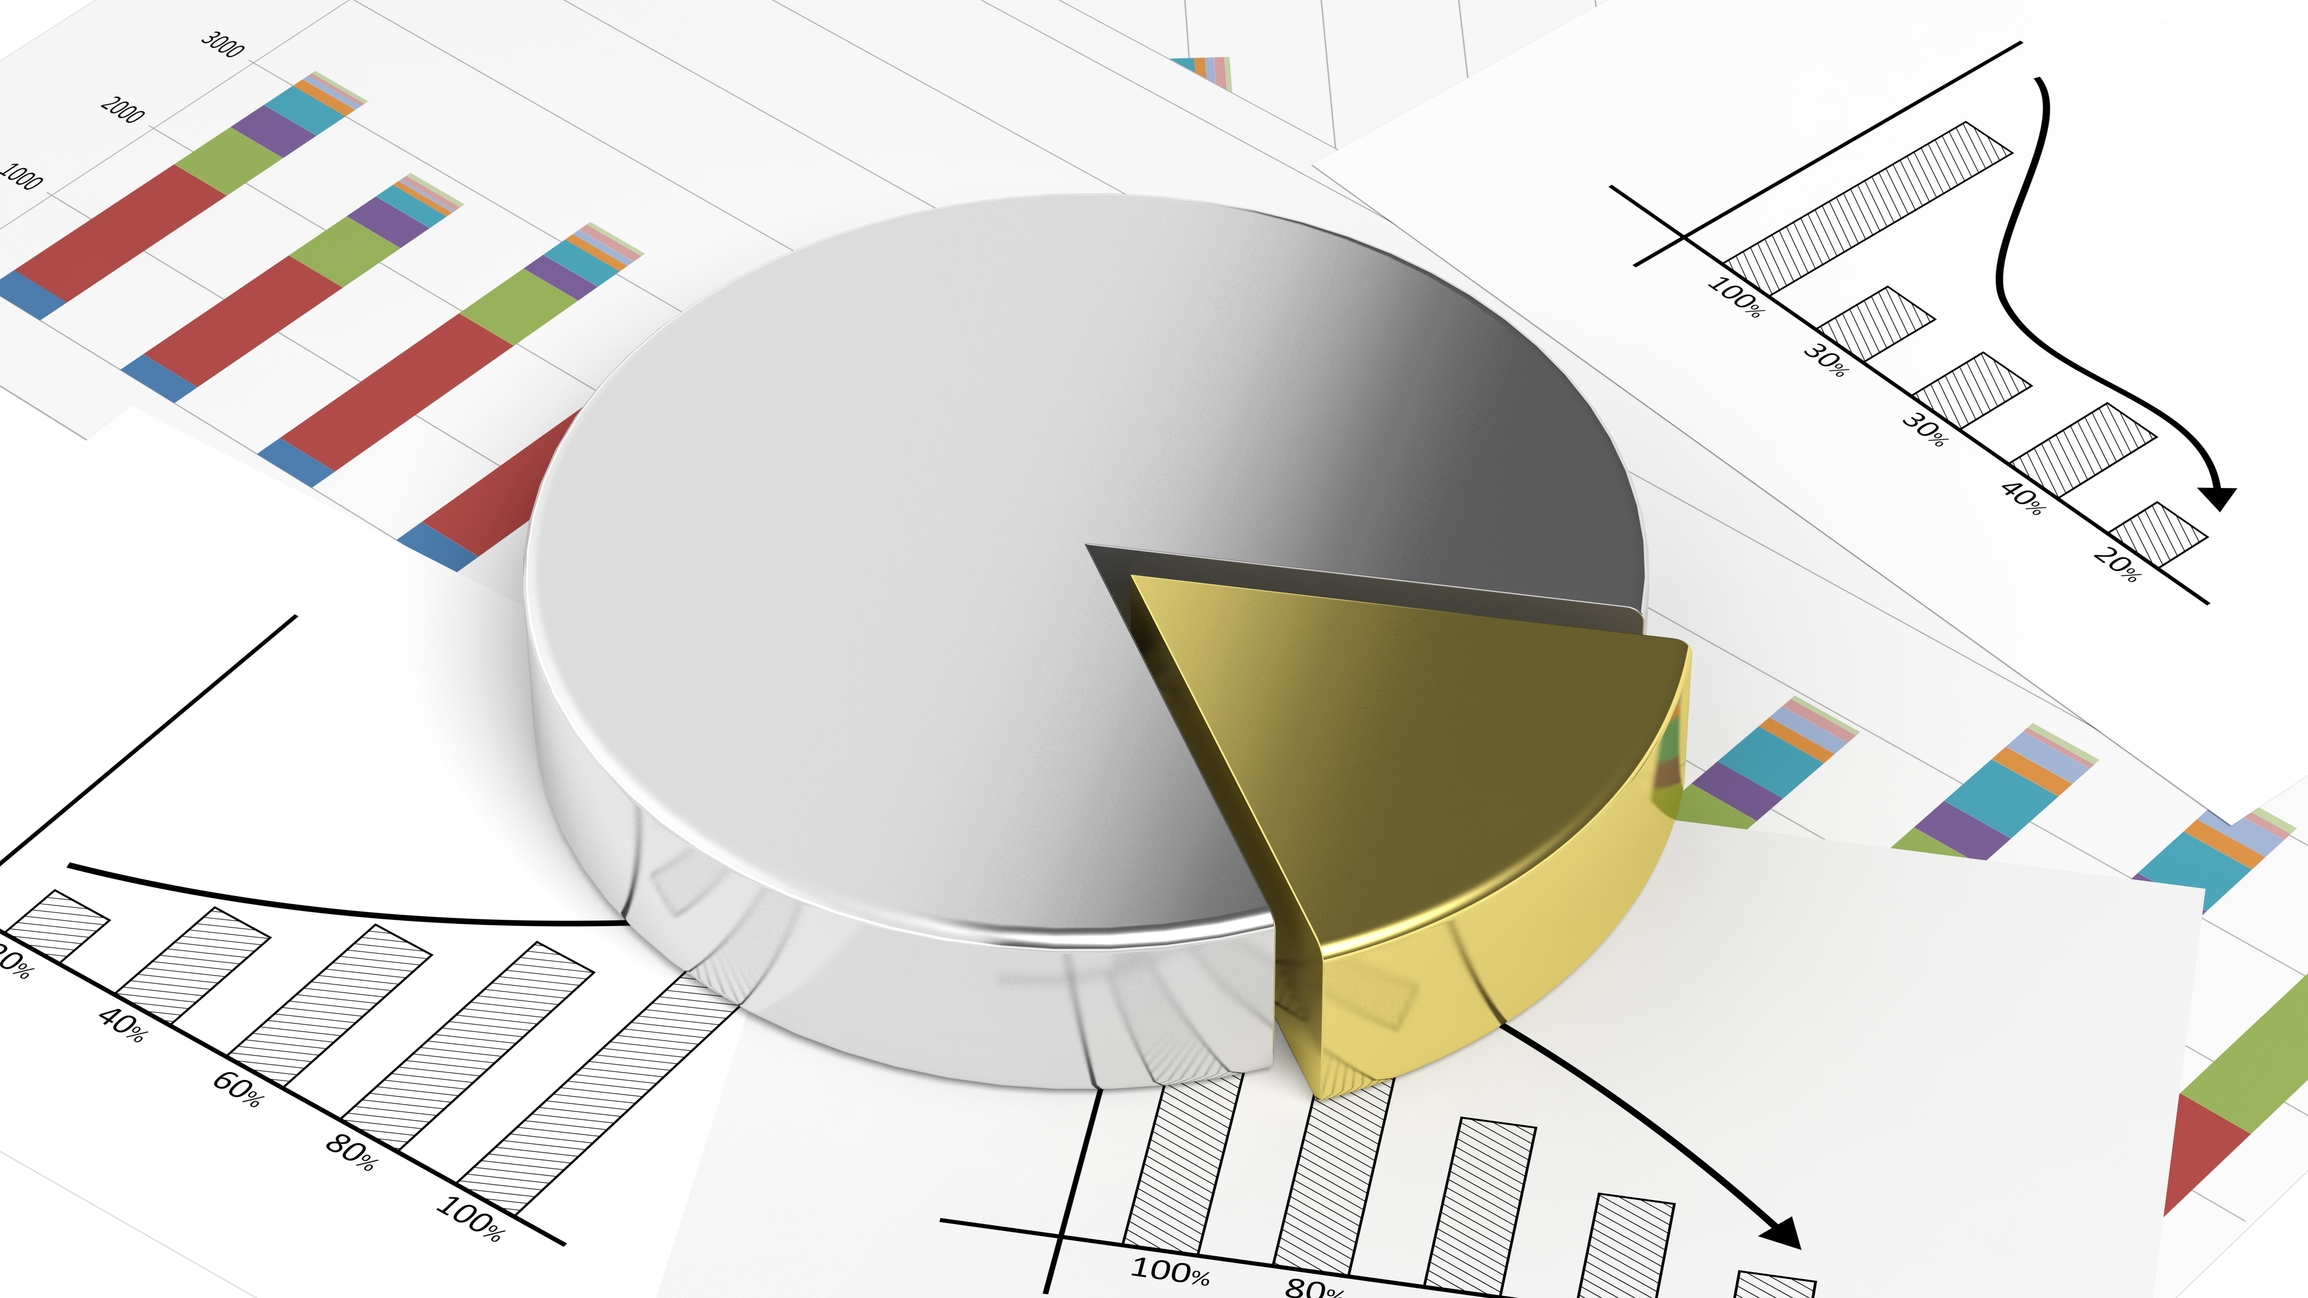 image showing bar graphs and a pie chart with gold and silver portions